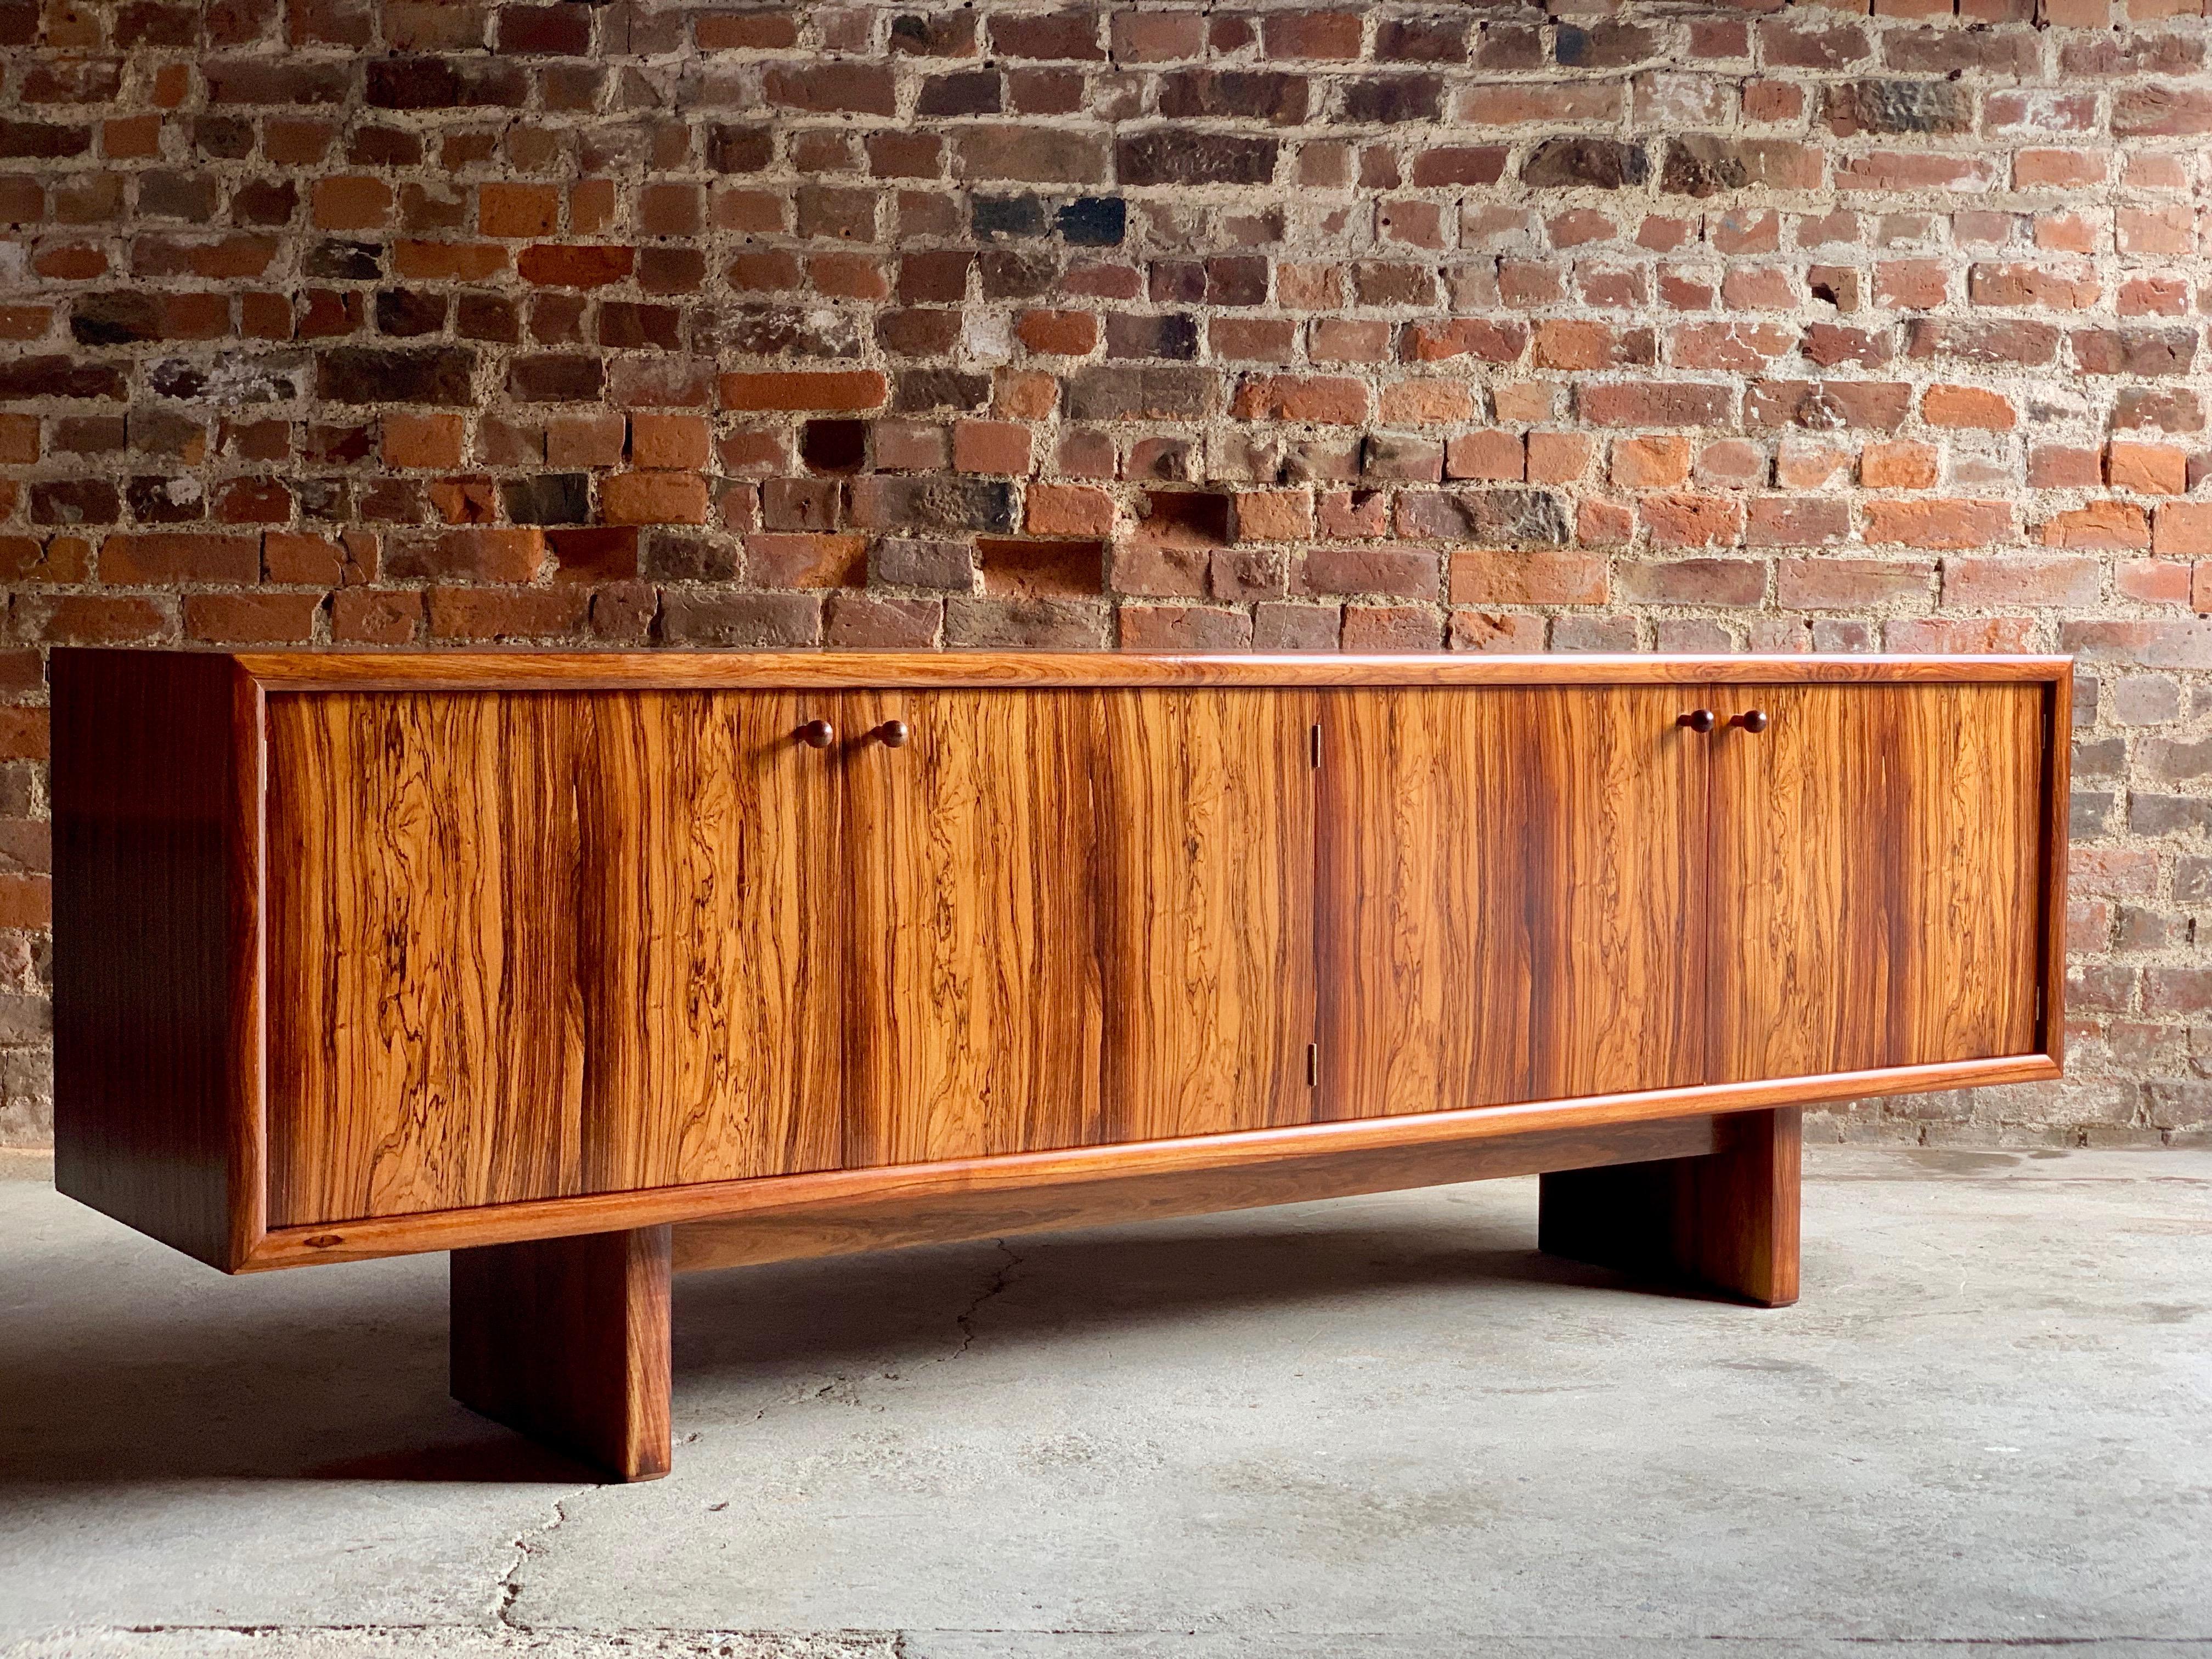 Gordon Russell 'Marlow' rosewood sideboard credenza designed by Martin Hall for Gordon Russell Ltd of Broadway, material: Figured rosewood - date: 1970s, the rectangular top with beautiful repeating rosewood pattern over four cupboard doors, shelves